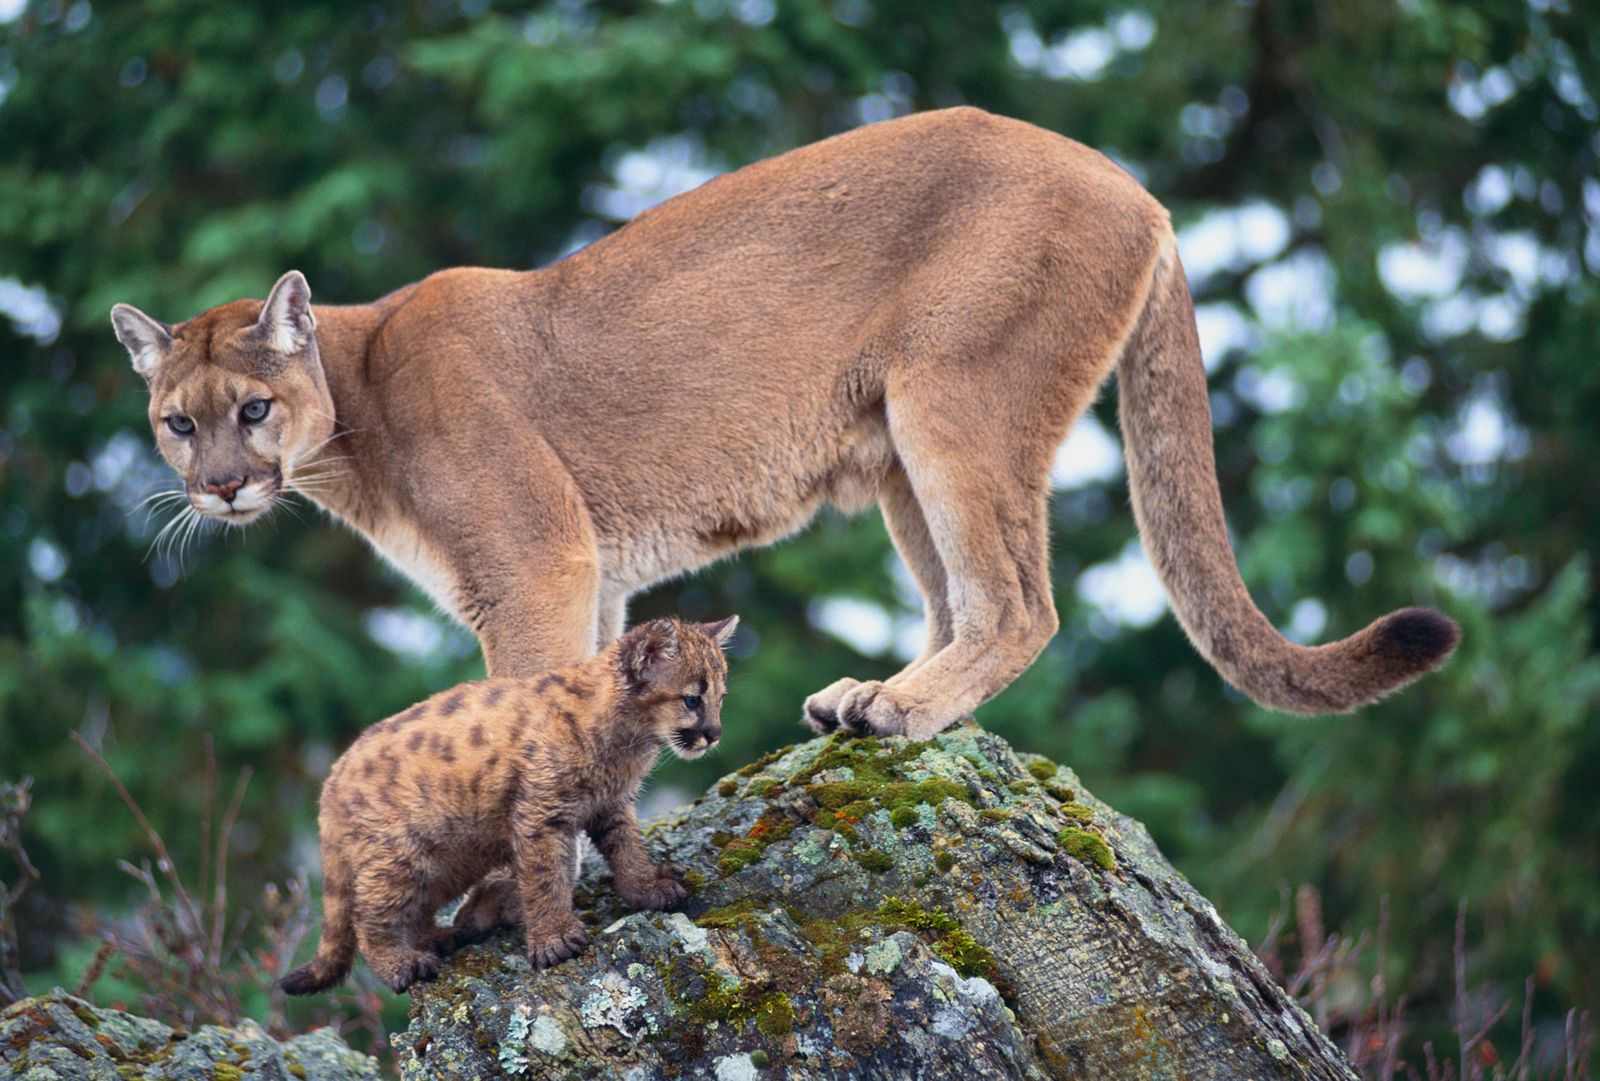 Cougars Are Returning to the Midwest | Smart News| Smithsonian Magazine